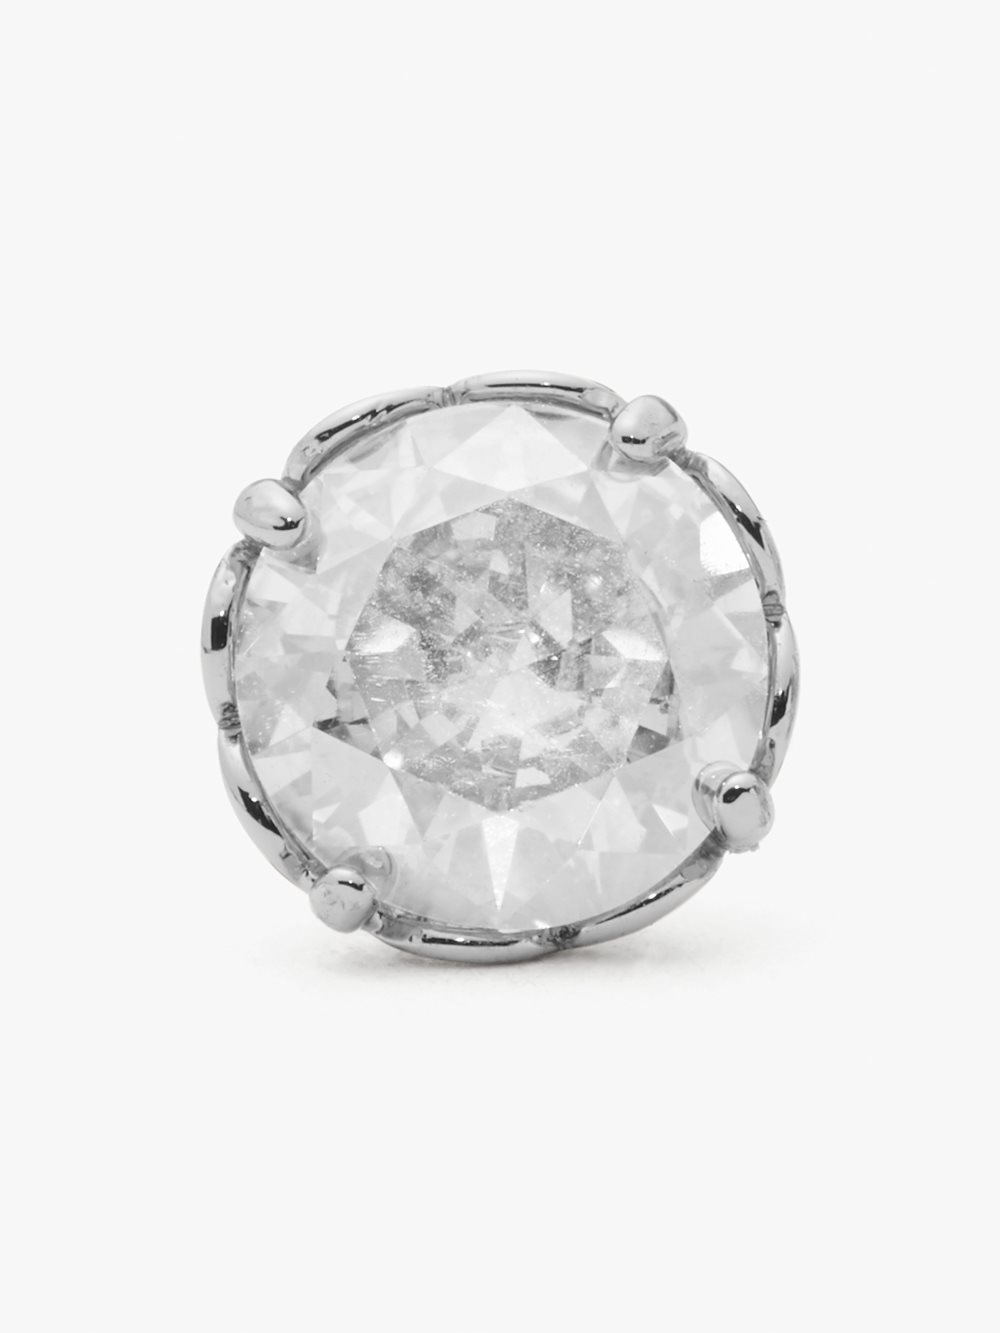 Women's clear/silver that sparkle round earrings | Kate Spade